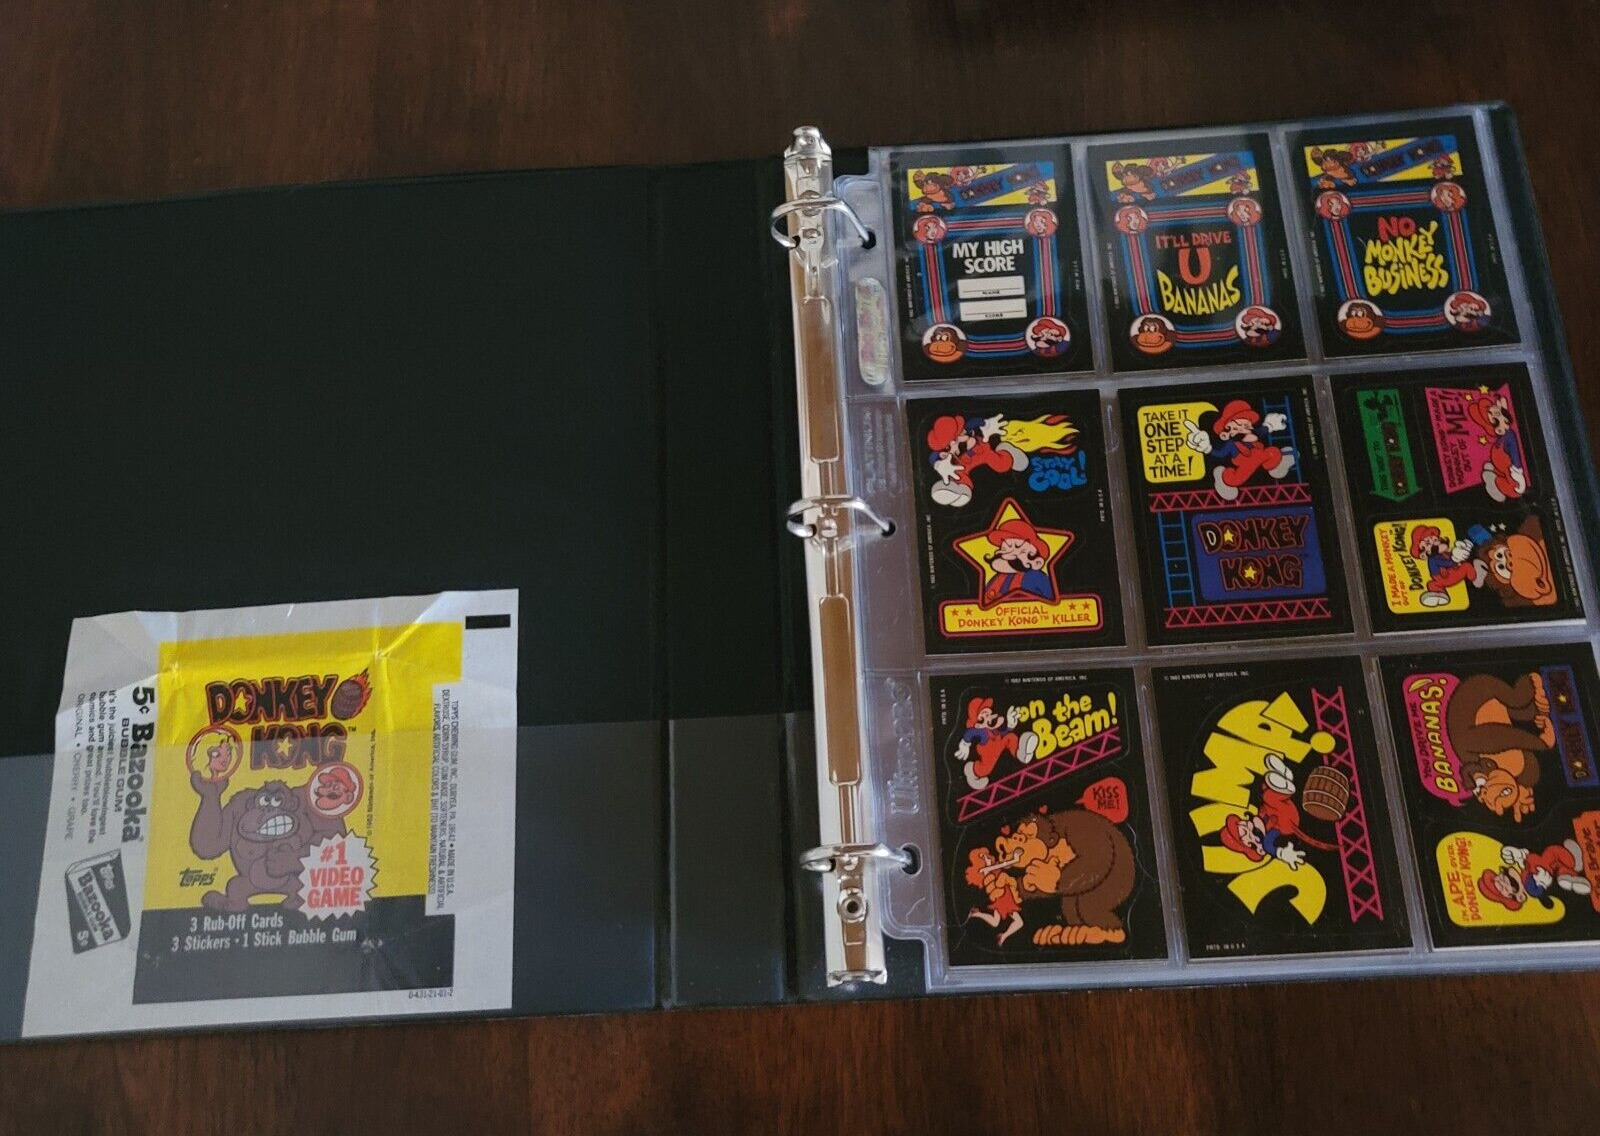 1982 Topps Donkey Kong Trading Card Set - Complete with Collectors Binder